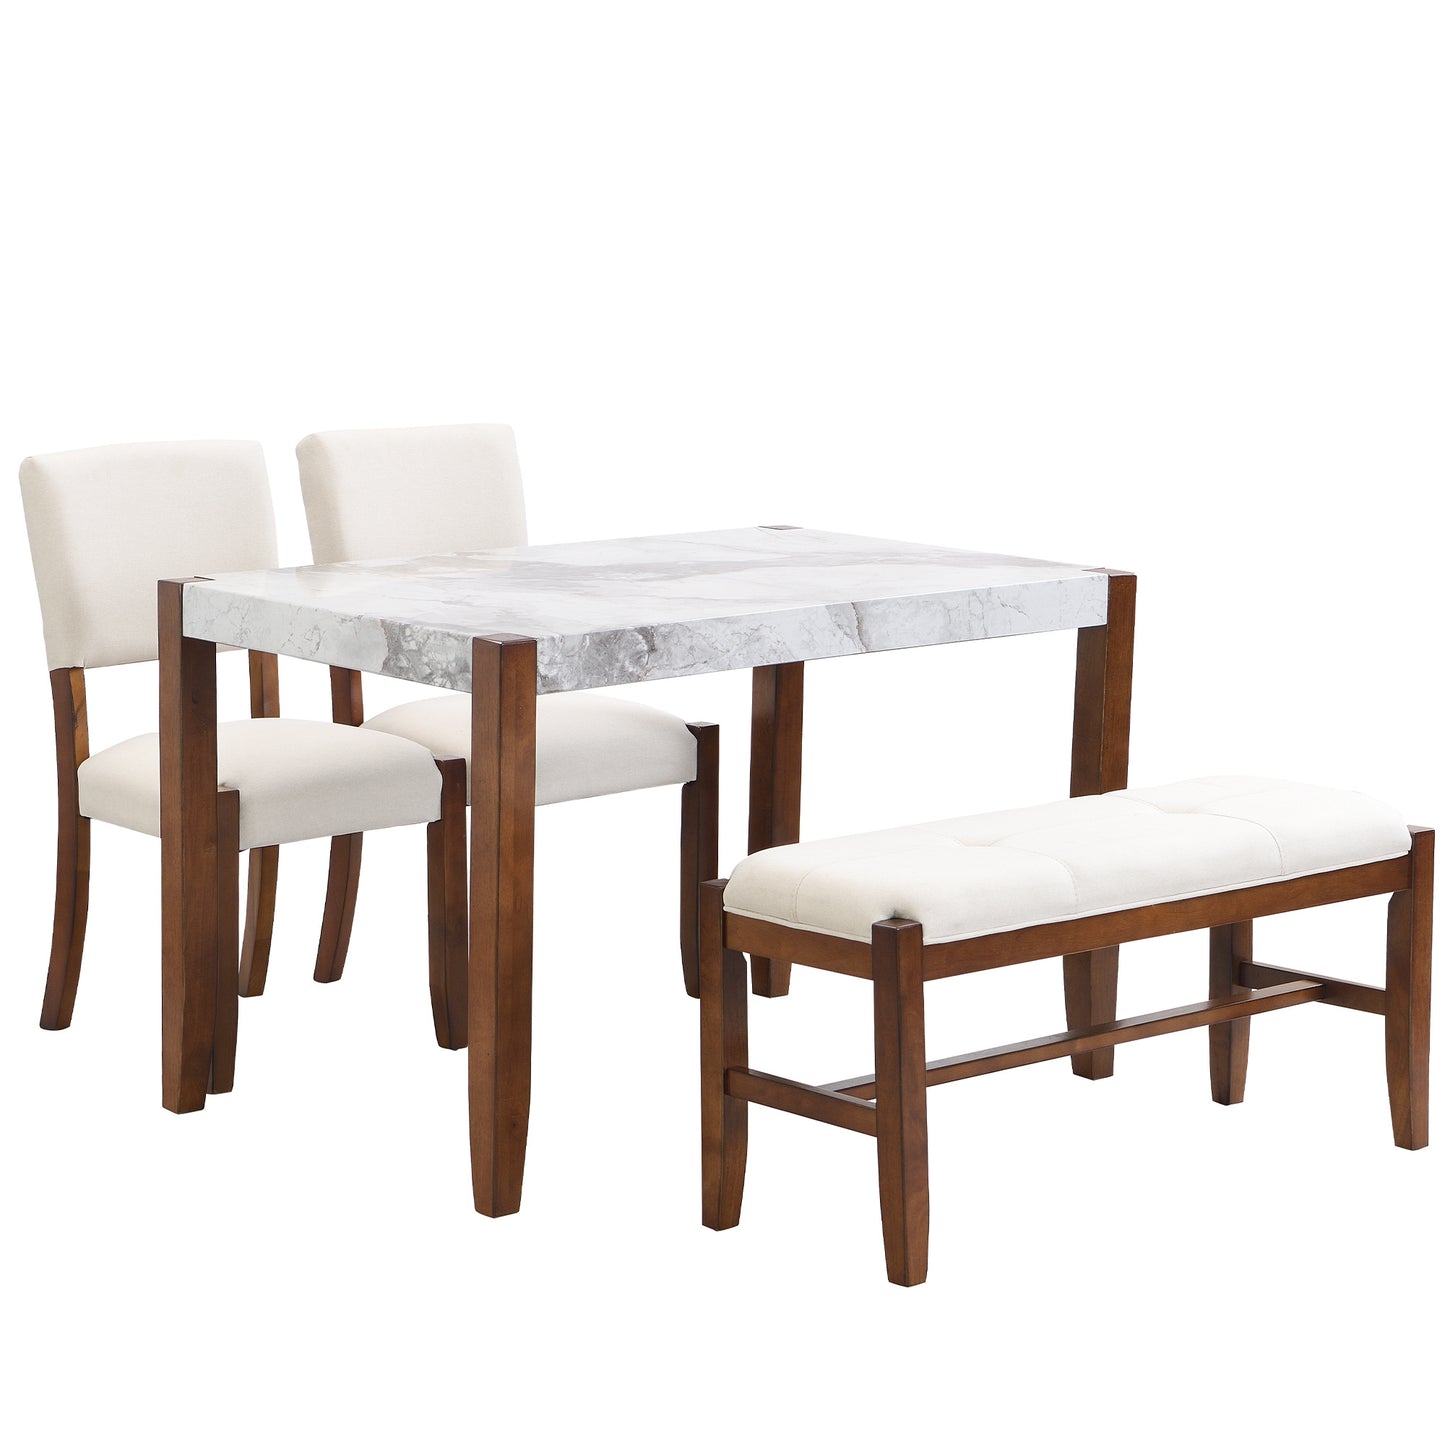 4-piece modern dining furniture set  46" faux marble style